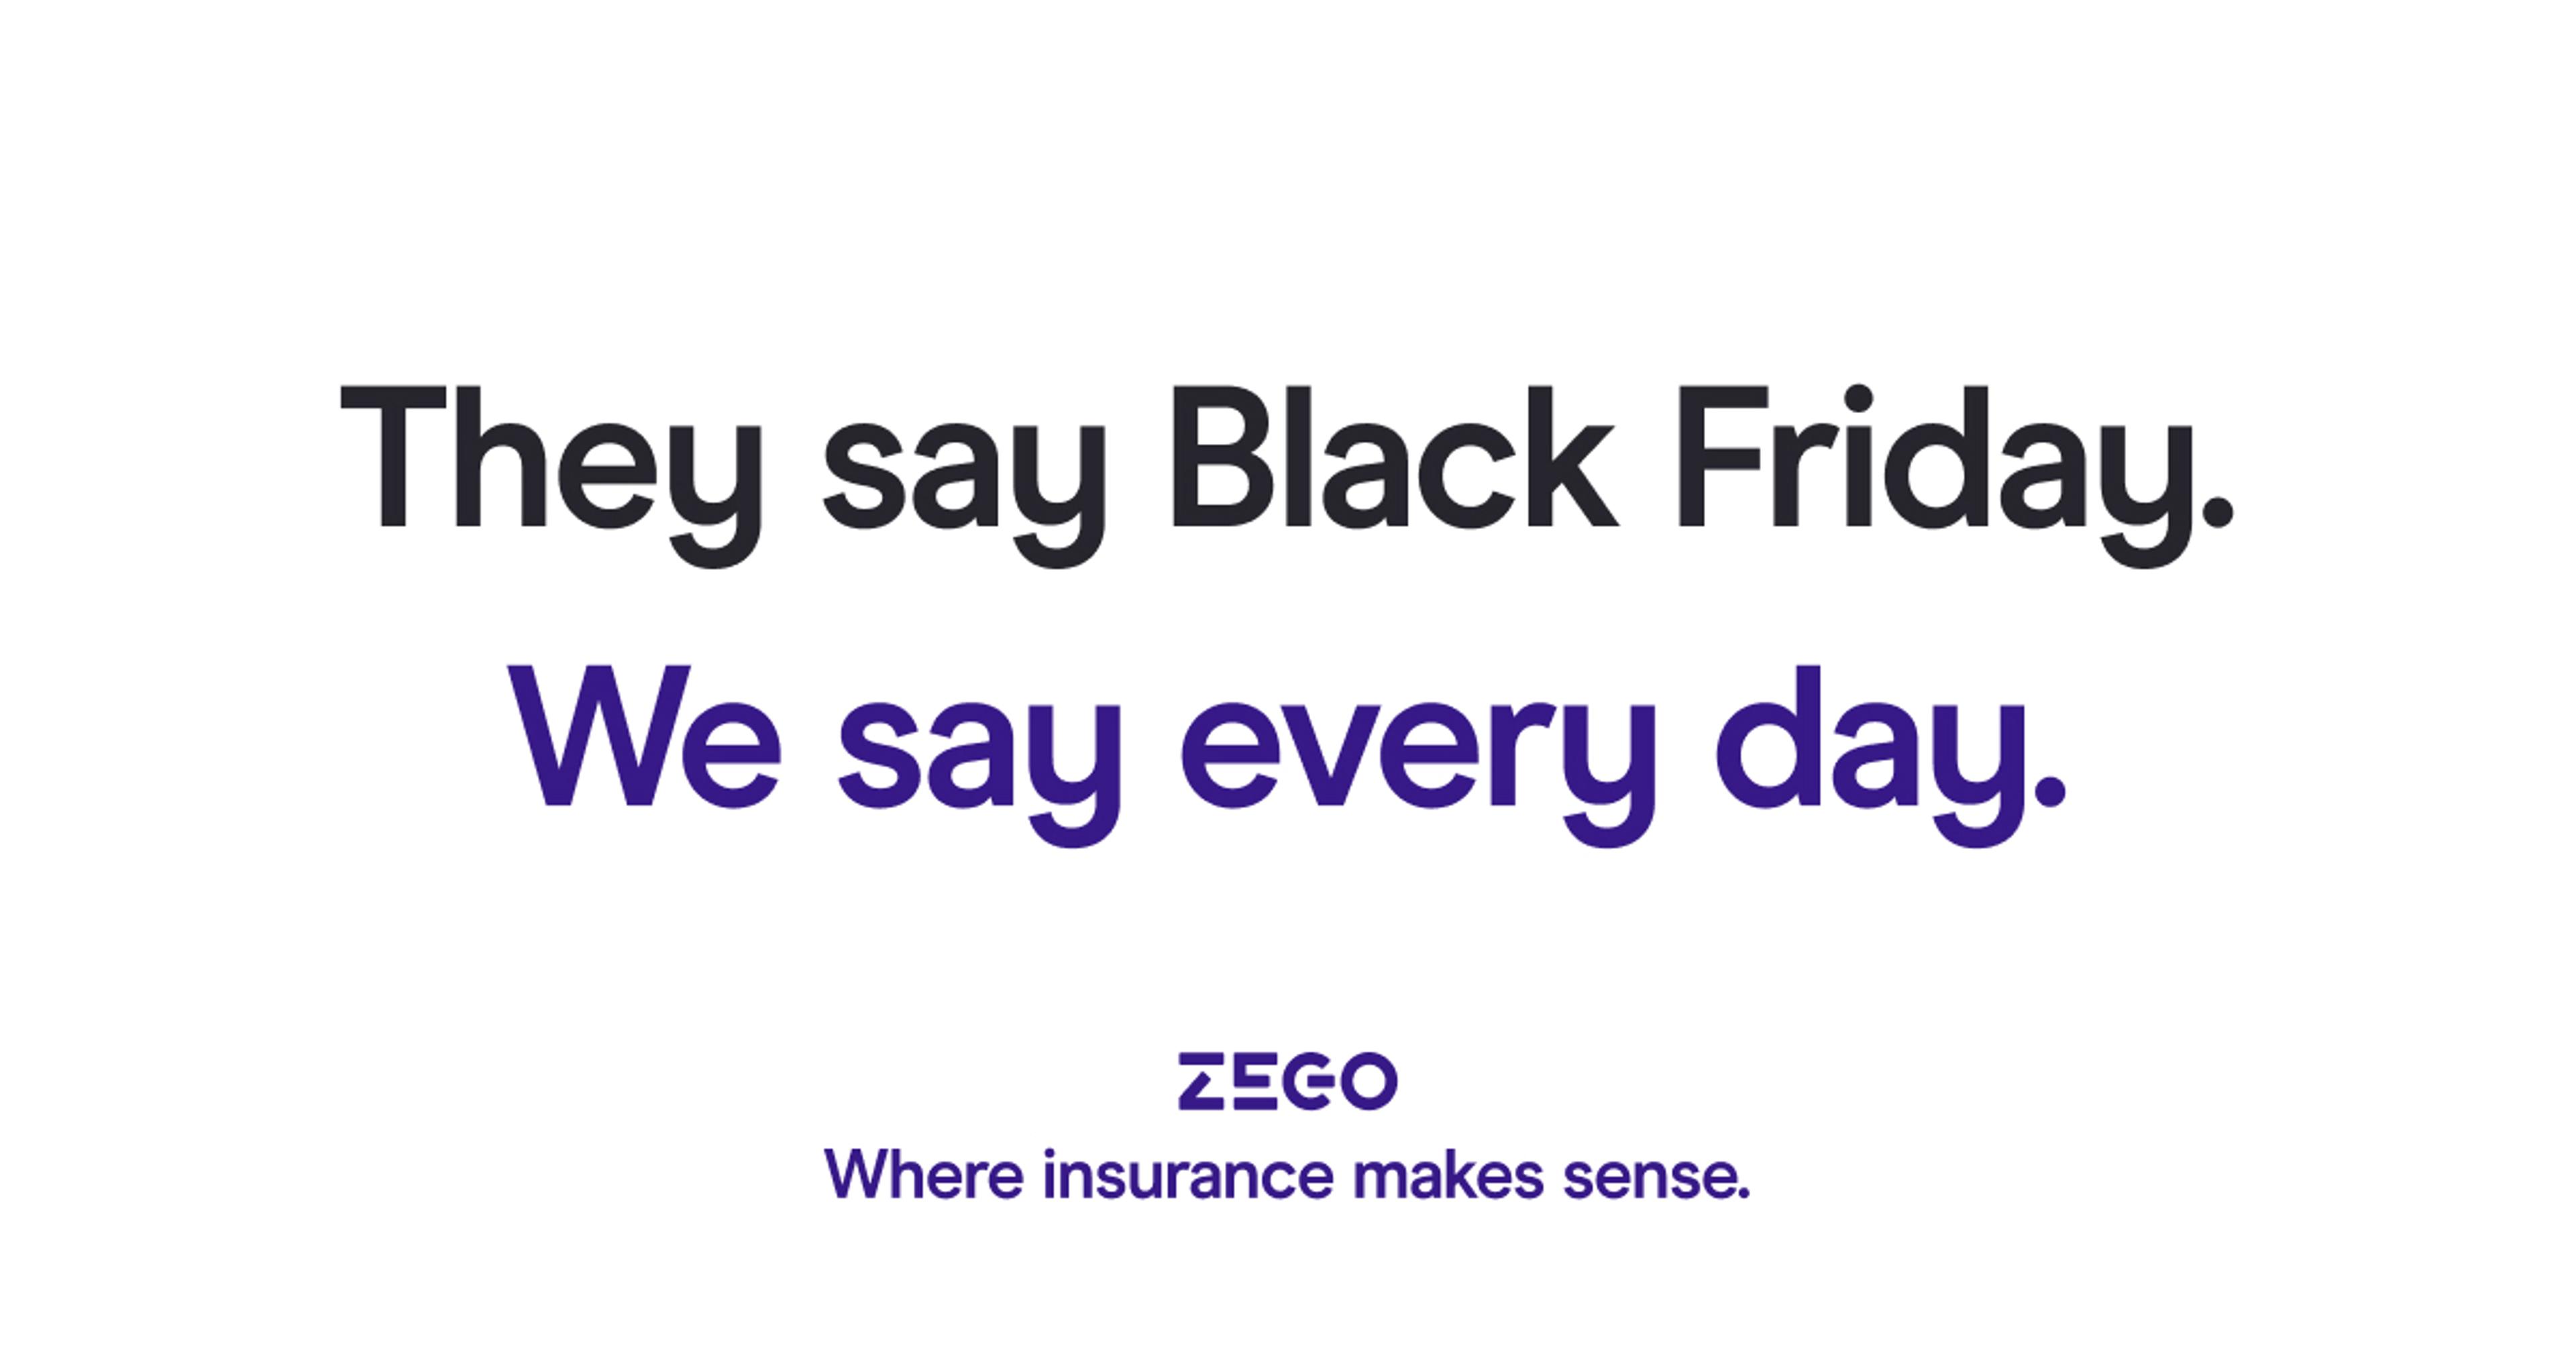 They say Black Friday. We say every day.